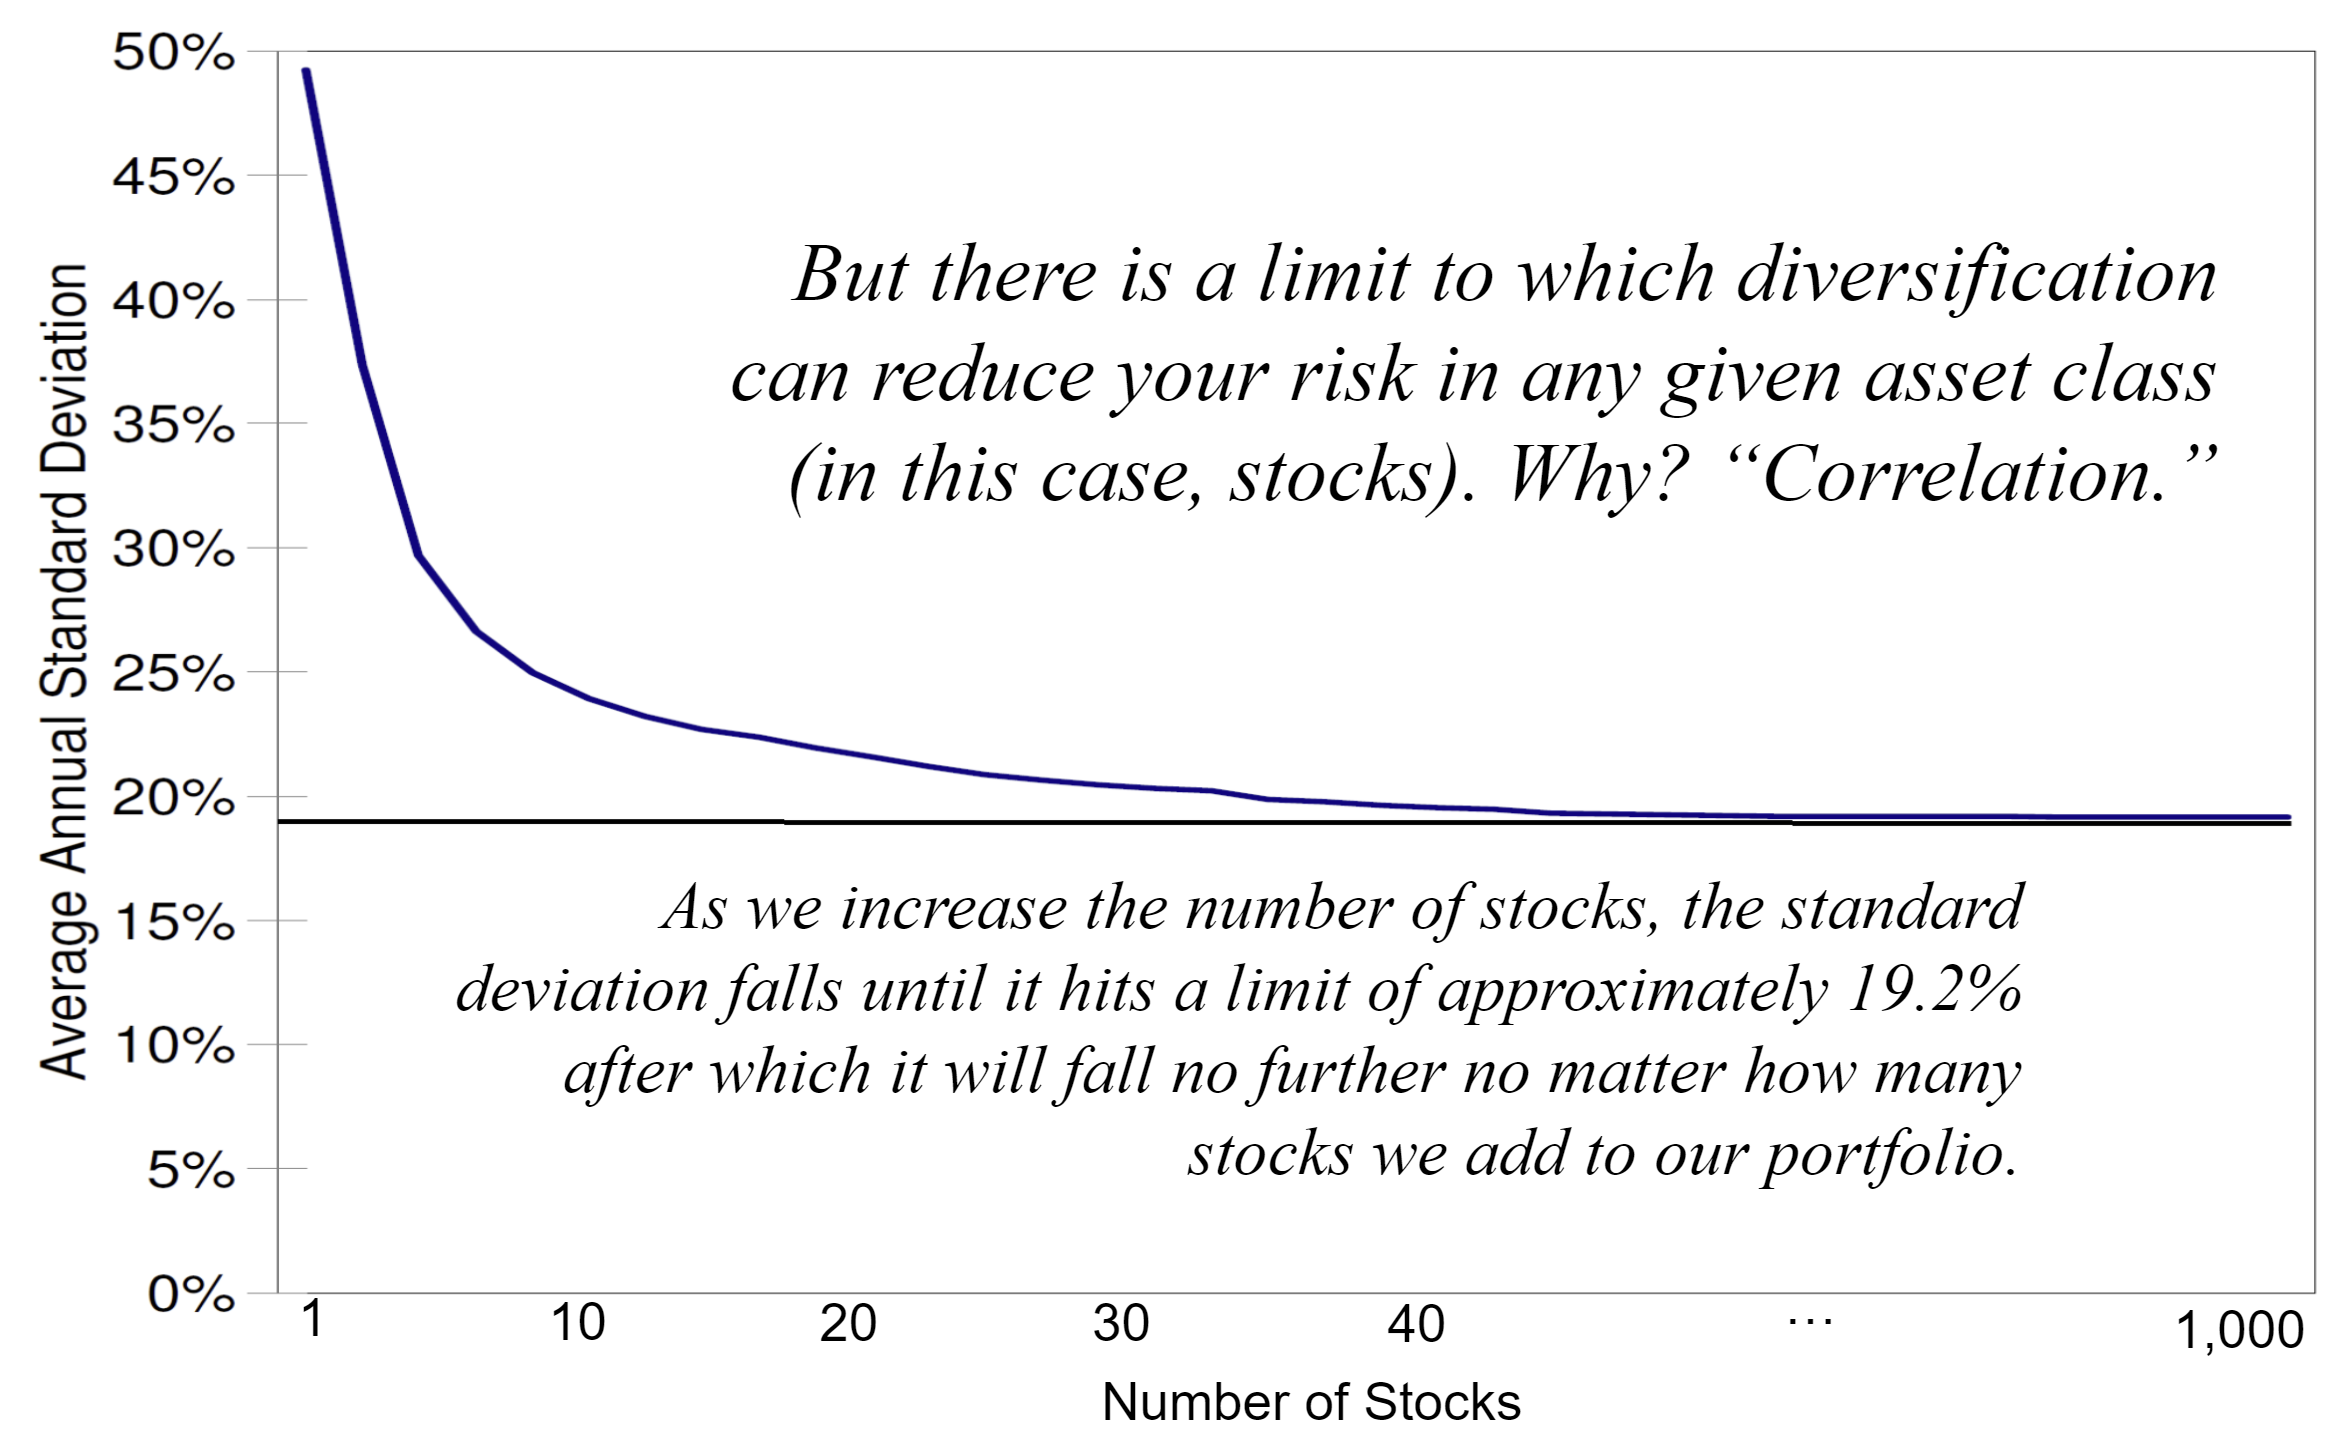 Graphic showing the limit that diversification can reduce risk in a portfolio. 